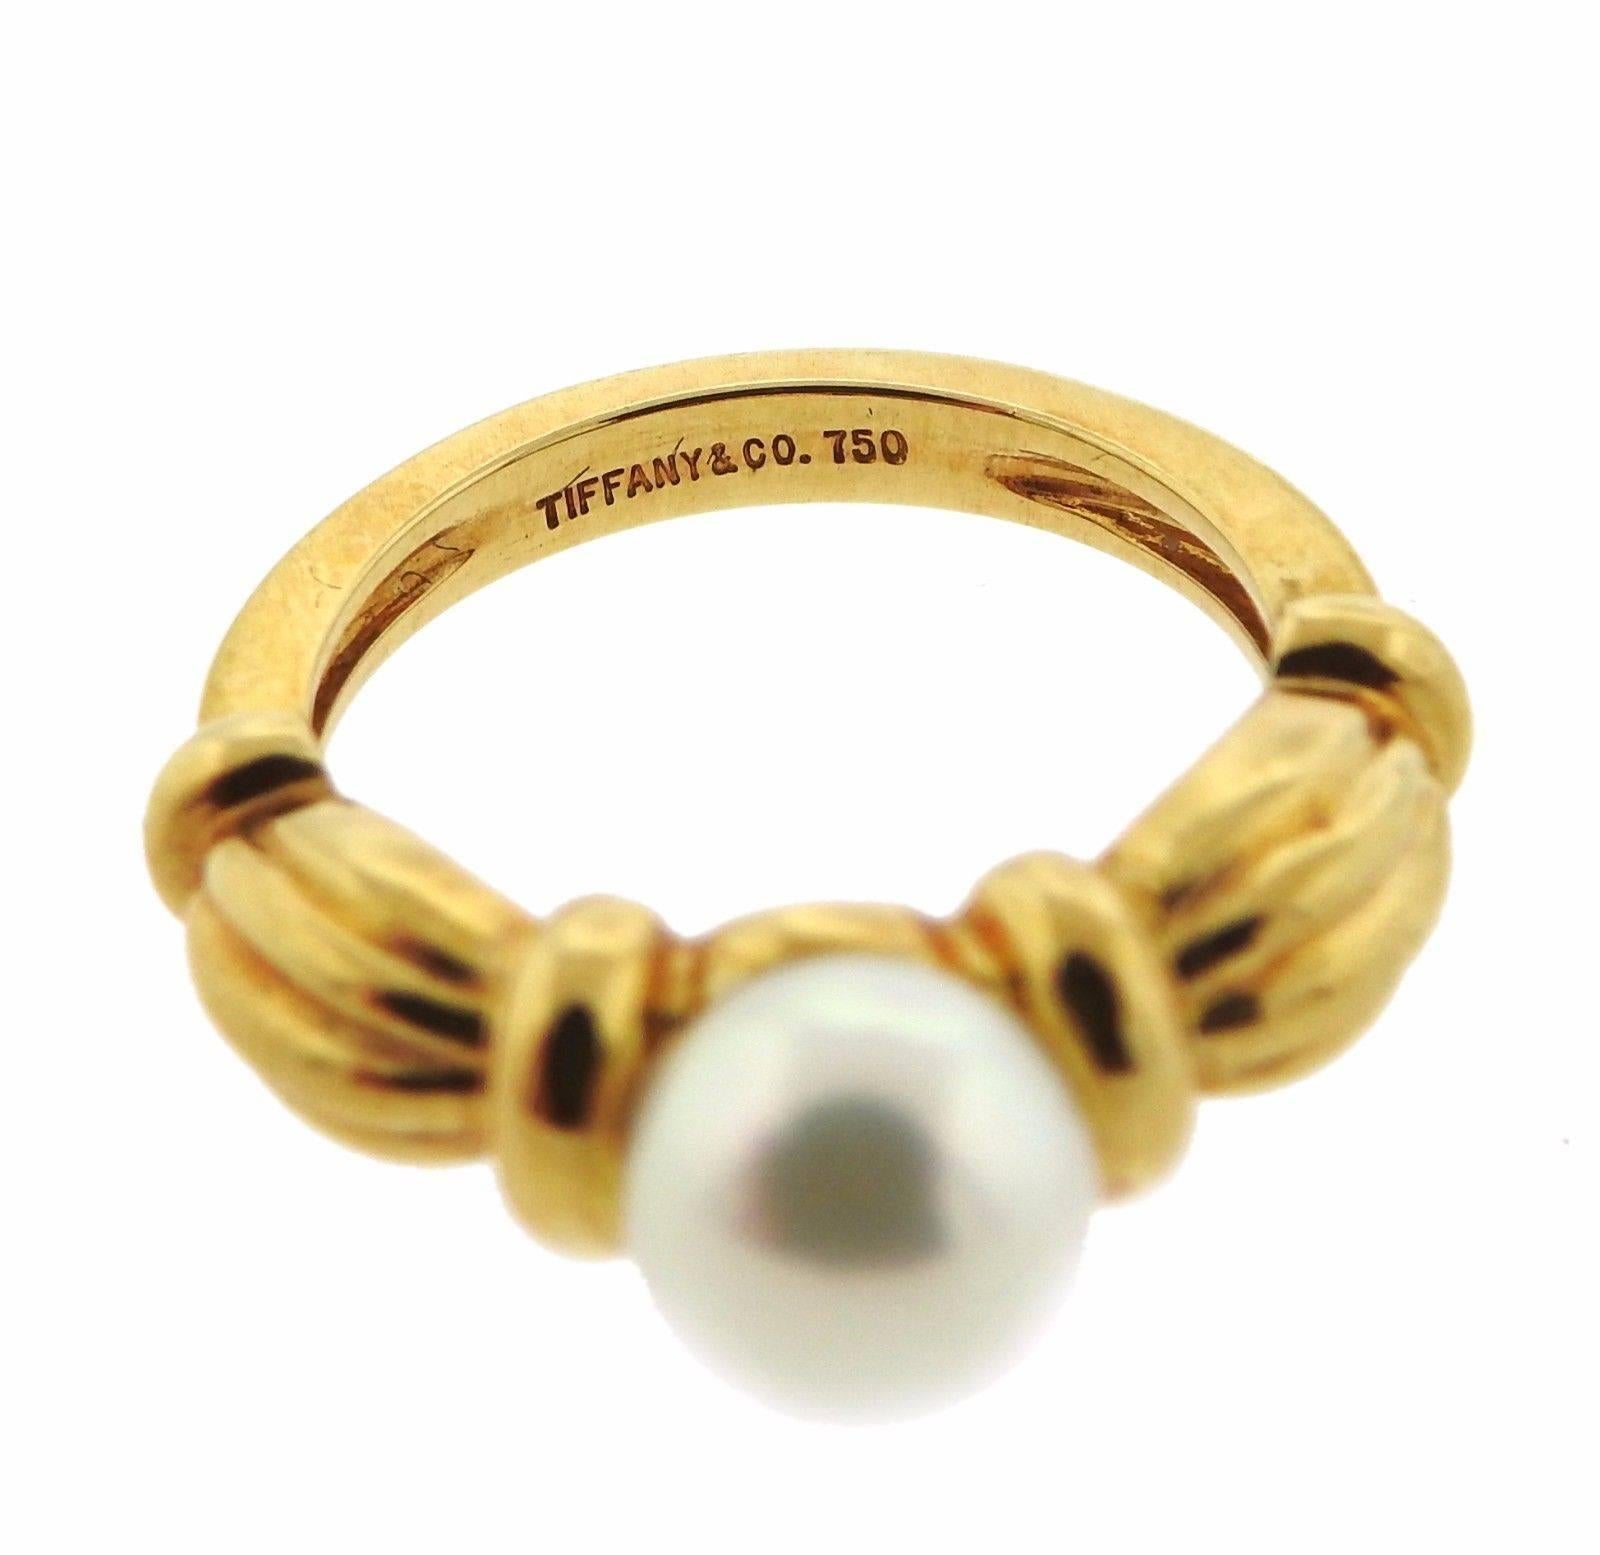 An 18k yellow gold ring set with a 7.3mm pearl.  The ring is a size 4.5 and weighs 5.9 grams.  Marked: Tiffany & Co. 750.